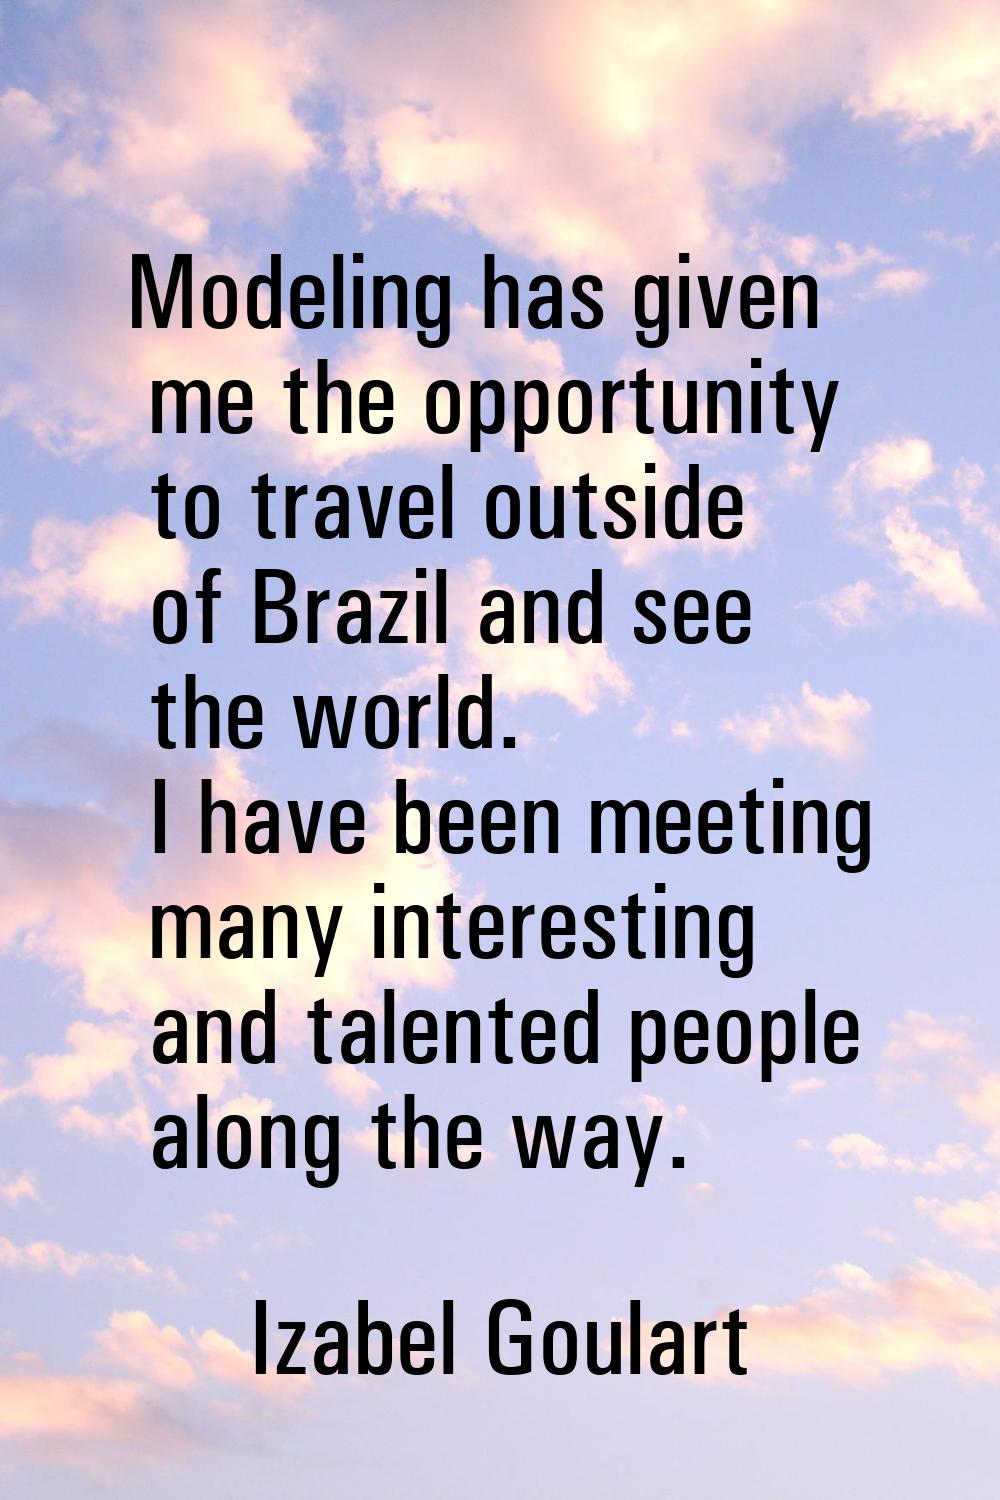 Modeling has given me the opportunity to travel outside of Brazil and see the world. I have been me